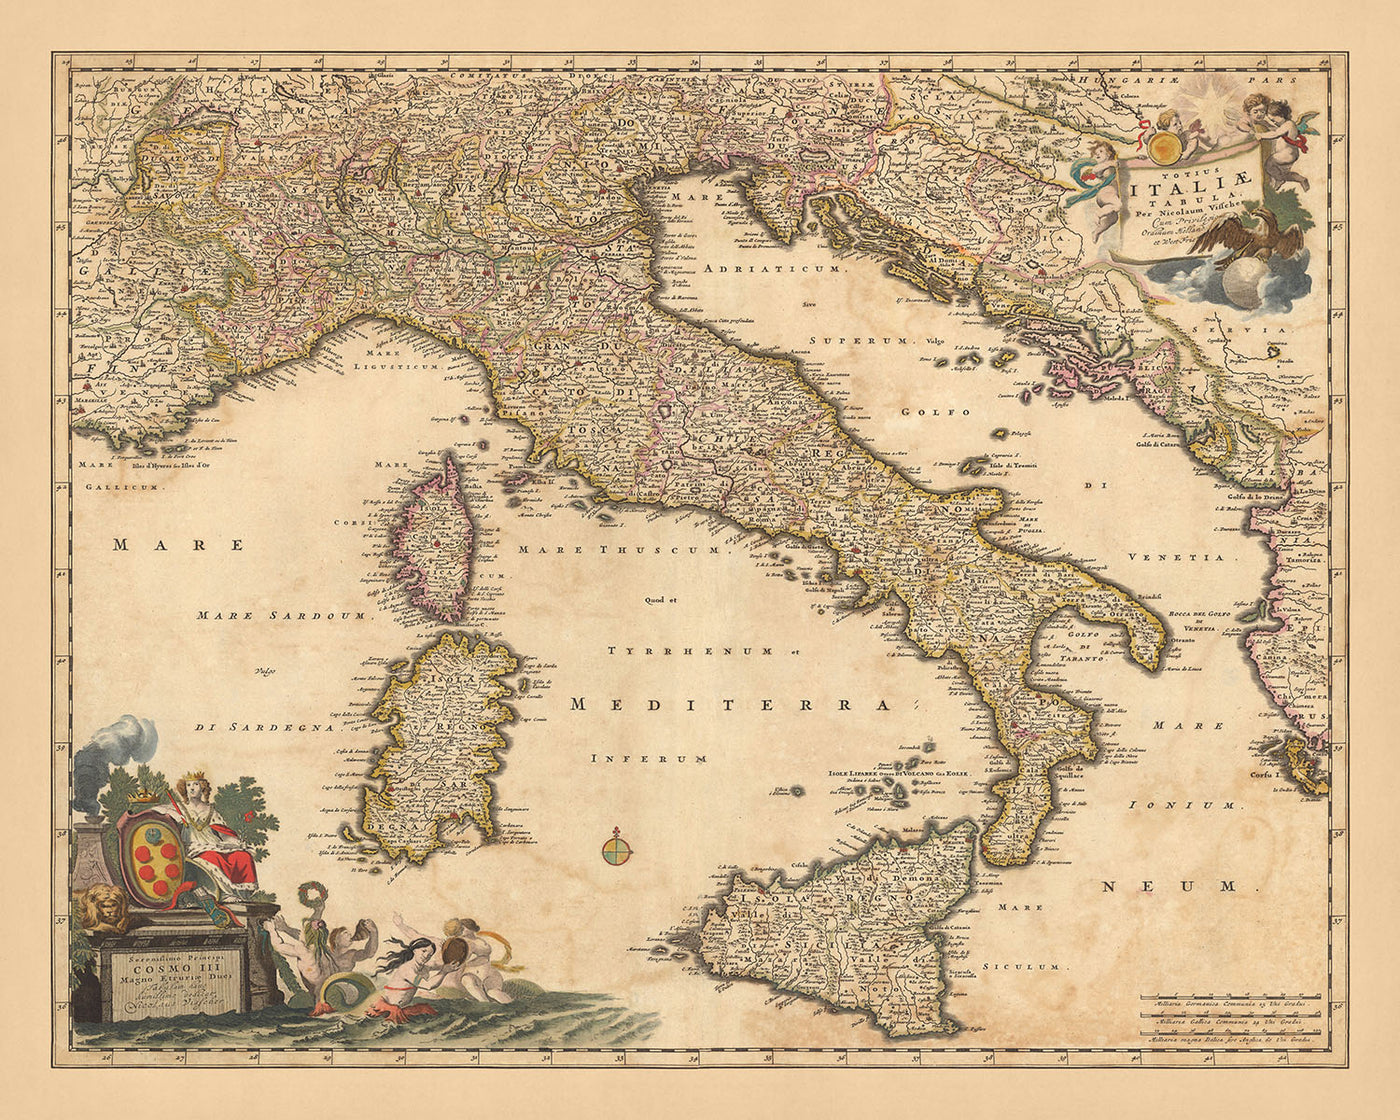 Old Map of Italy by Visscher, 1690: Rome, Milan, Palermo, Florence, Monaco